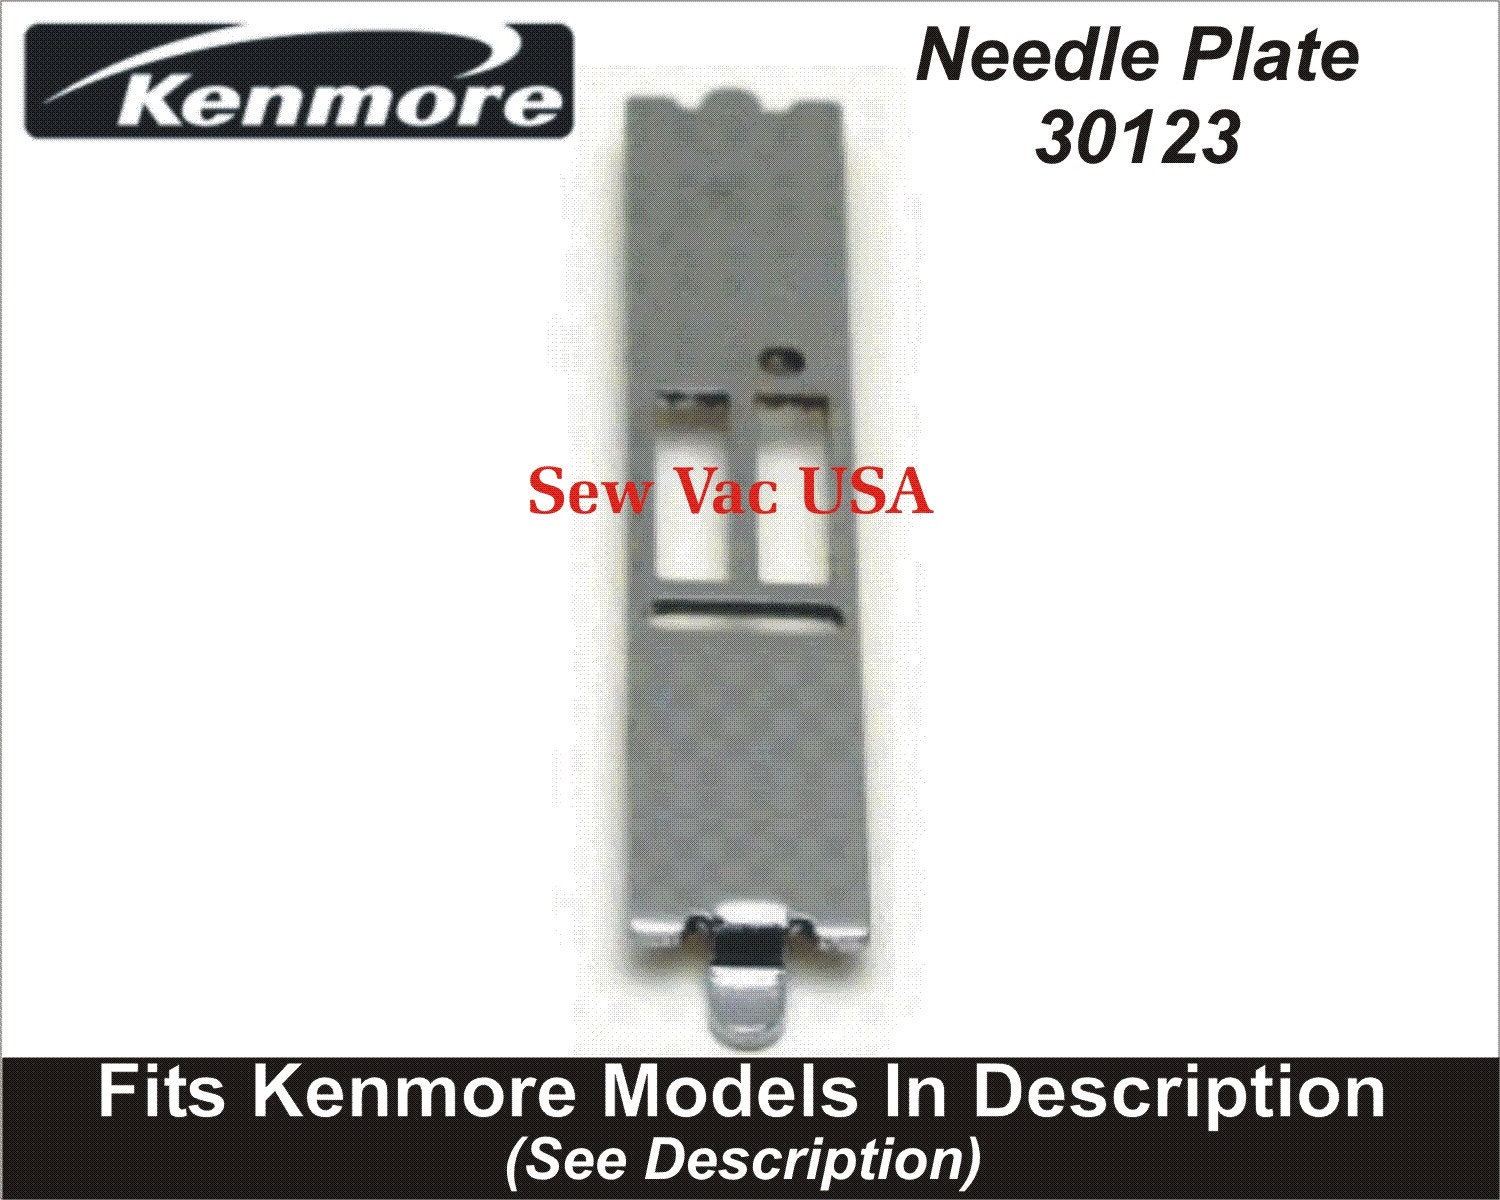 Reclaimed Stitches: The Kenmore Q-Foot and Q-Needle. Any Q-uestions?